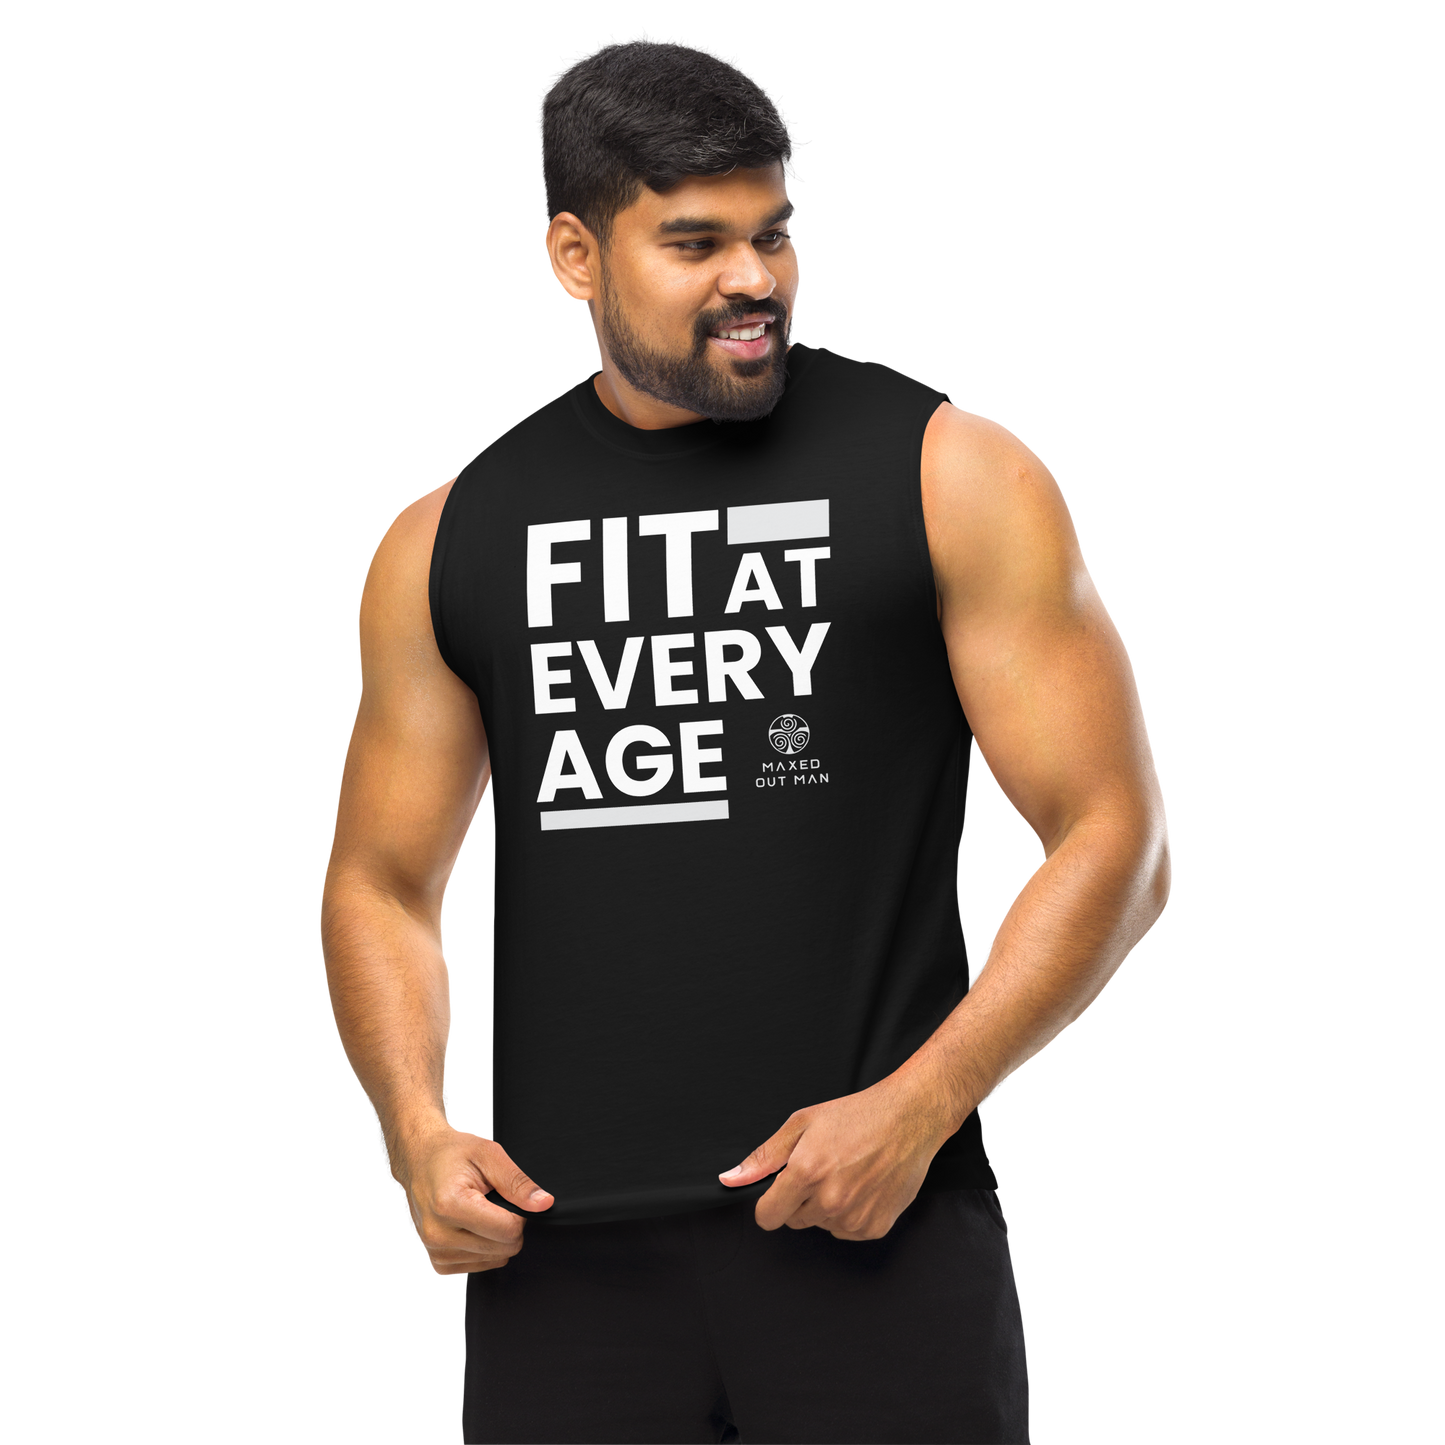 Fit at Every Age Muscle Shirt - Darker Coors